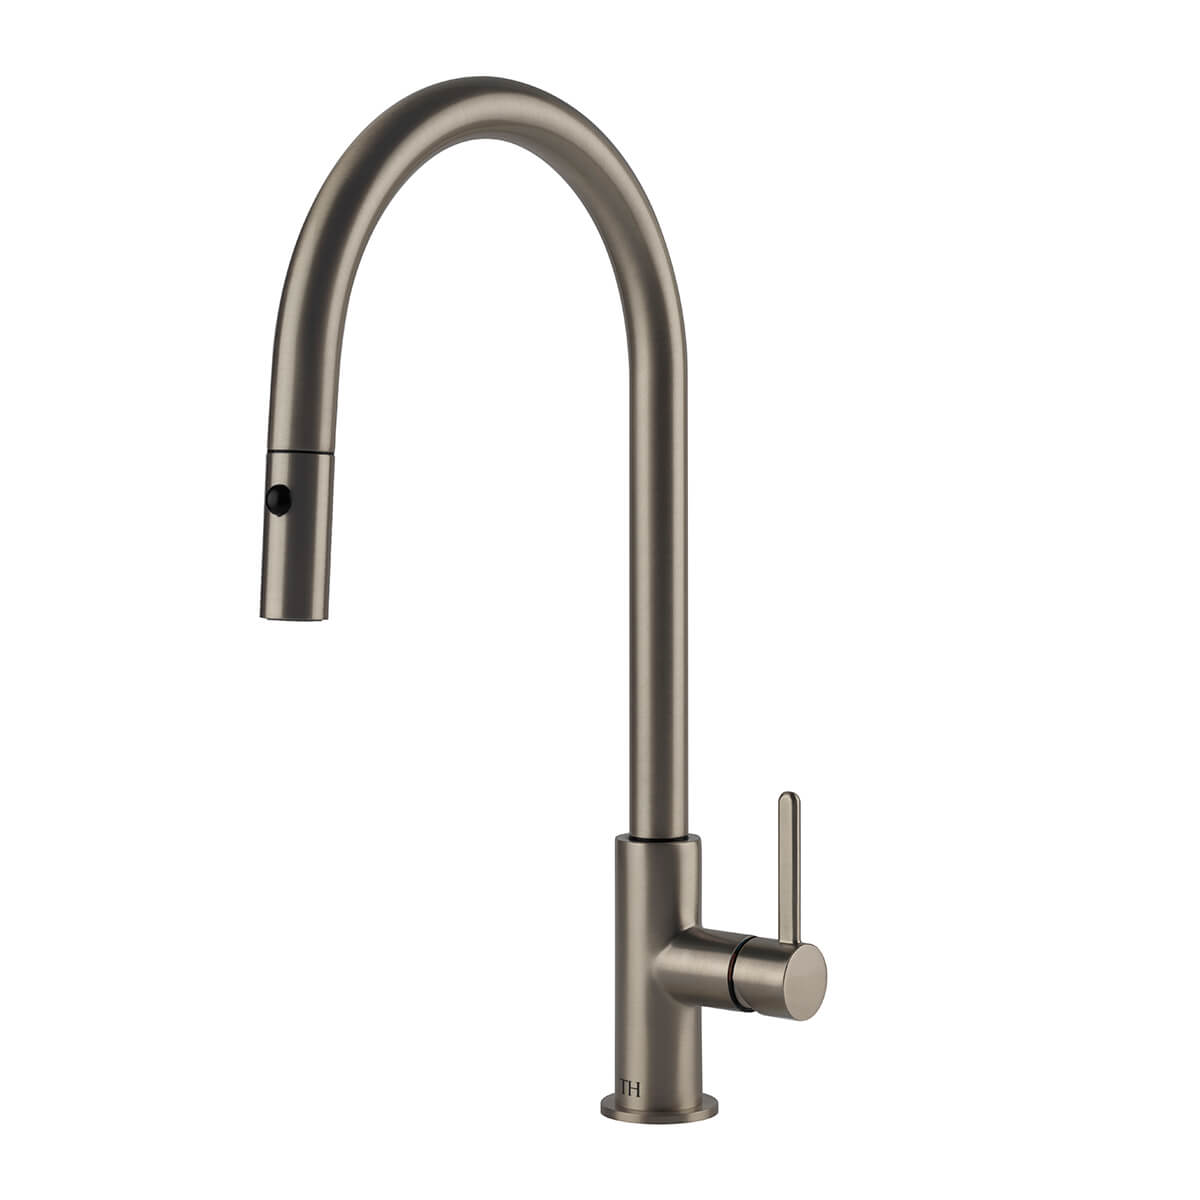 TURNER HASTINGS NAPLES PULL OUT SINK MIXER 410MM BRUSHED NICKEL